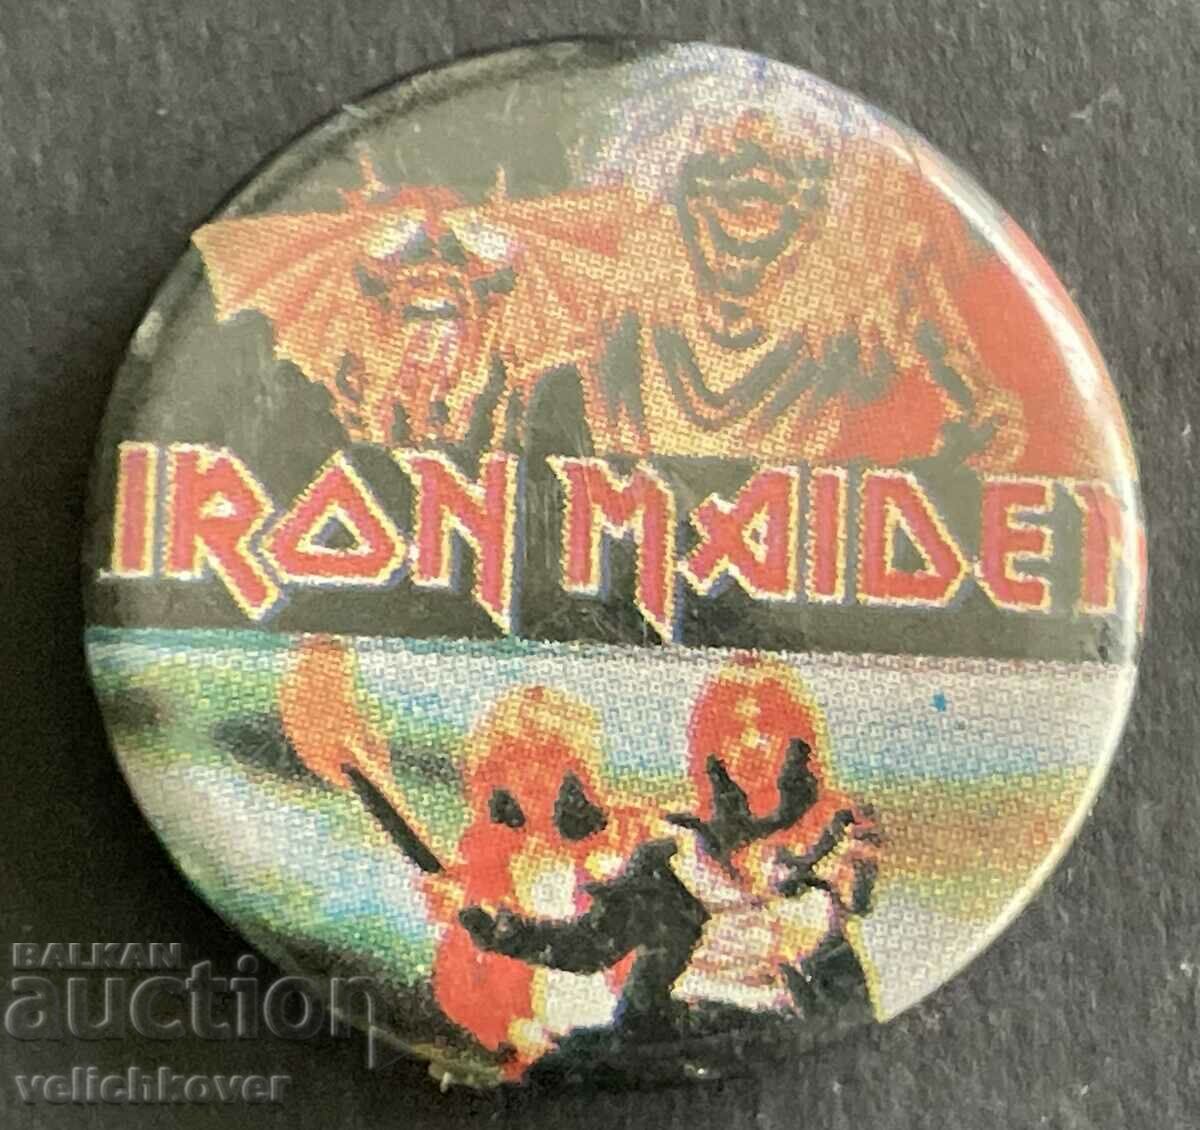 37558 Great Britain sign heavy metal band Iron Maiden